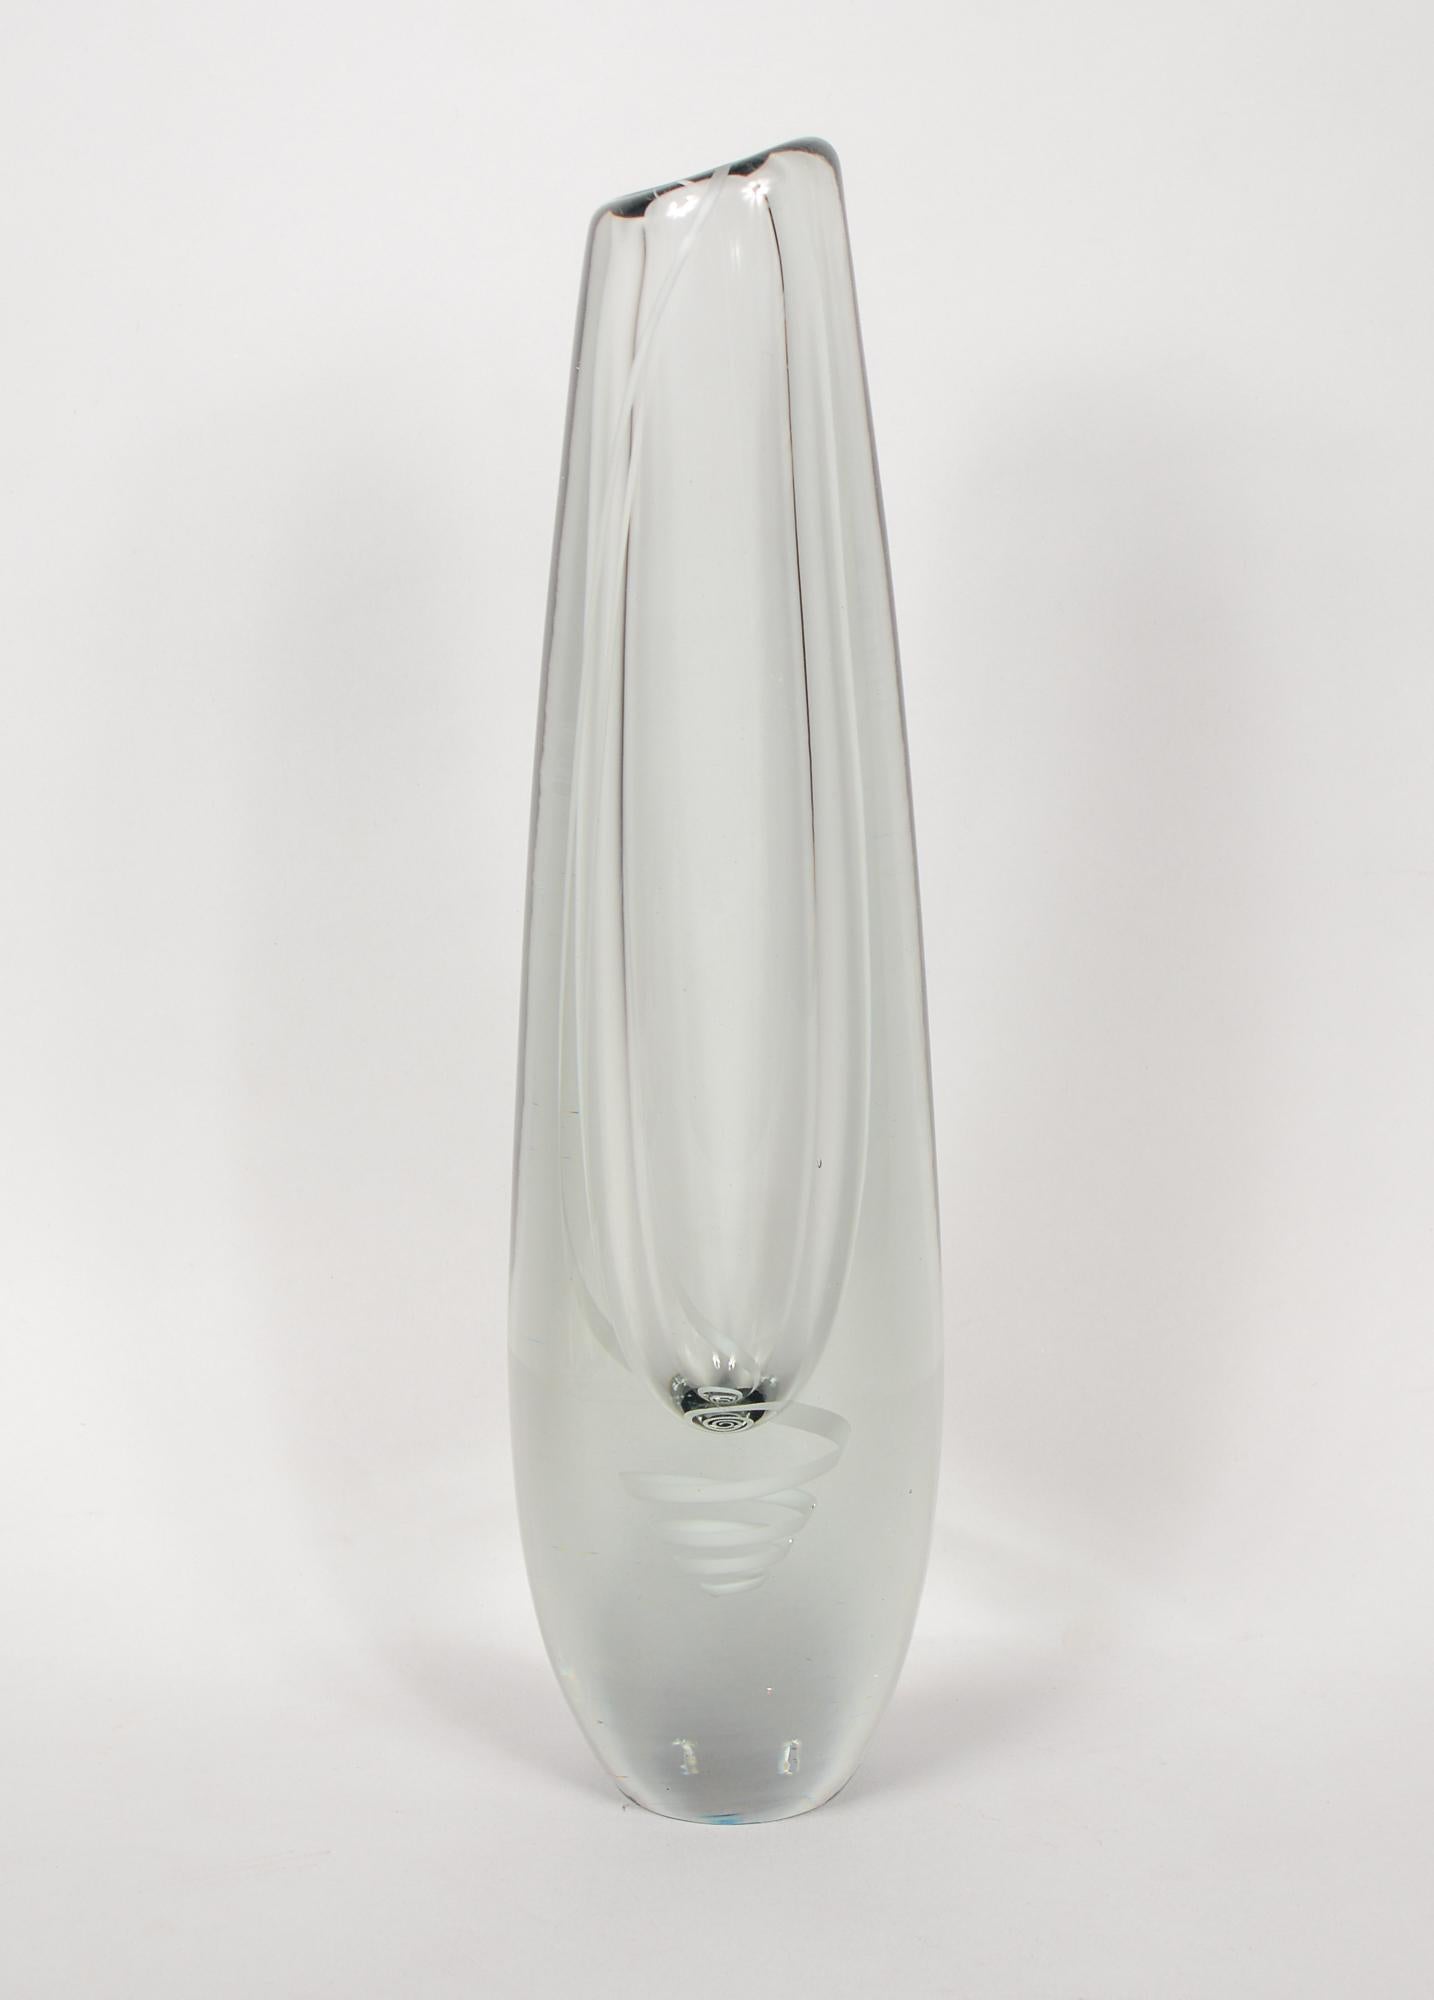 Serpentini vase designed by Gunnel Nyman in 1954. The vase was produced by Nuutajarvi Notsjo. This tall vase has a white ribbon that comes down from the lip and becomes an elongated spiral below the vase cavity. Fully signed on the bottom. There are